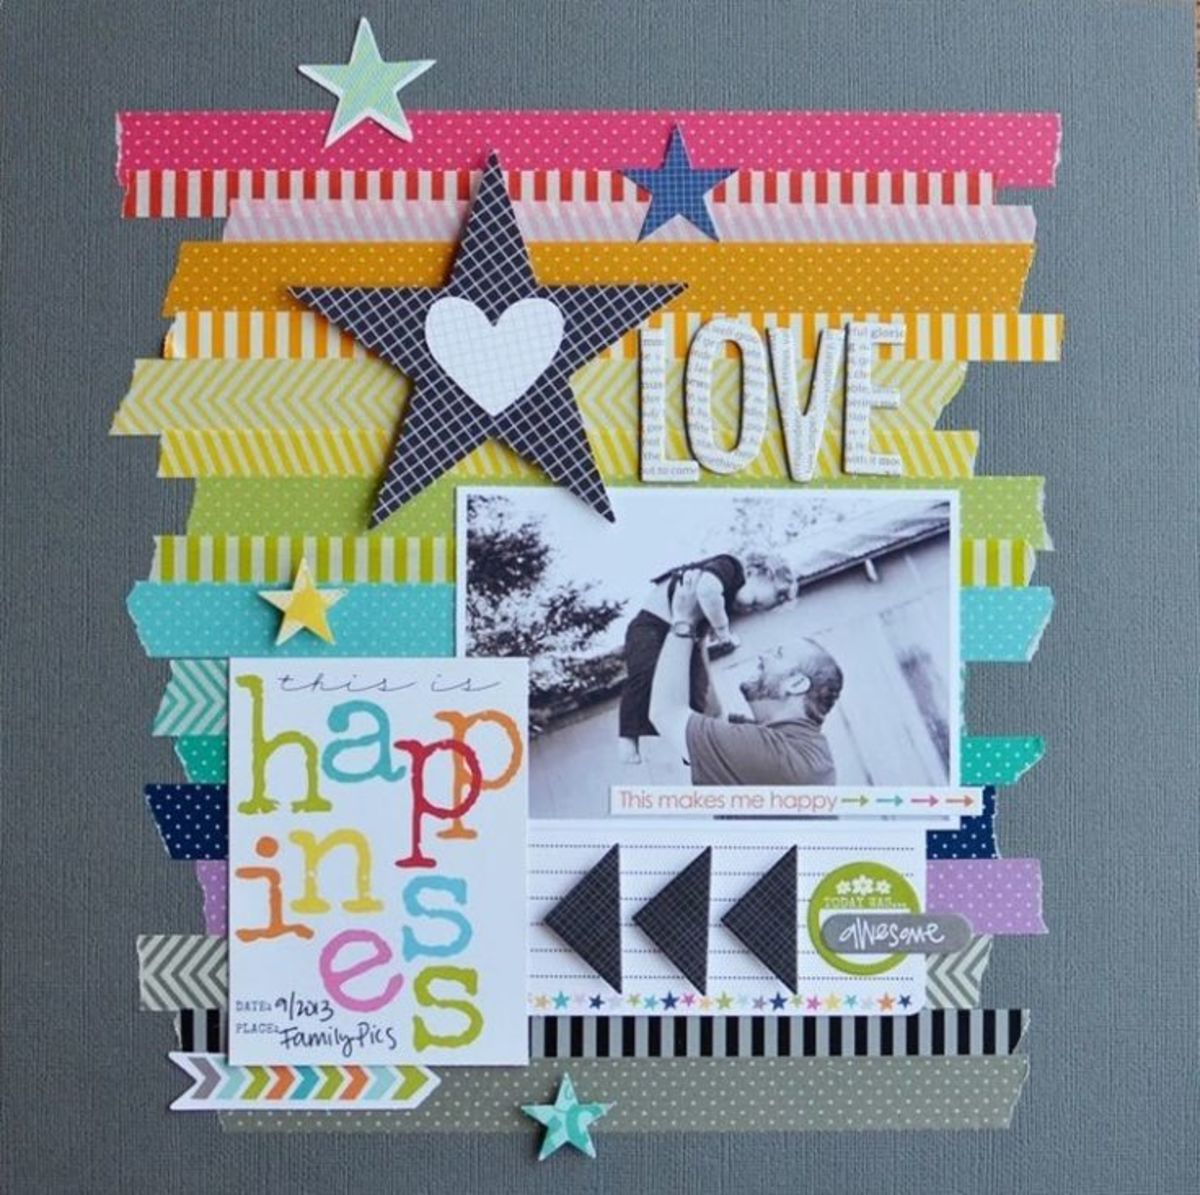 Washi Tape Use on Scrapbook Pages